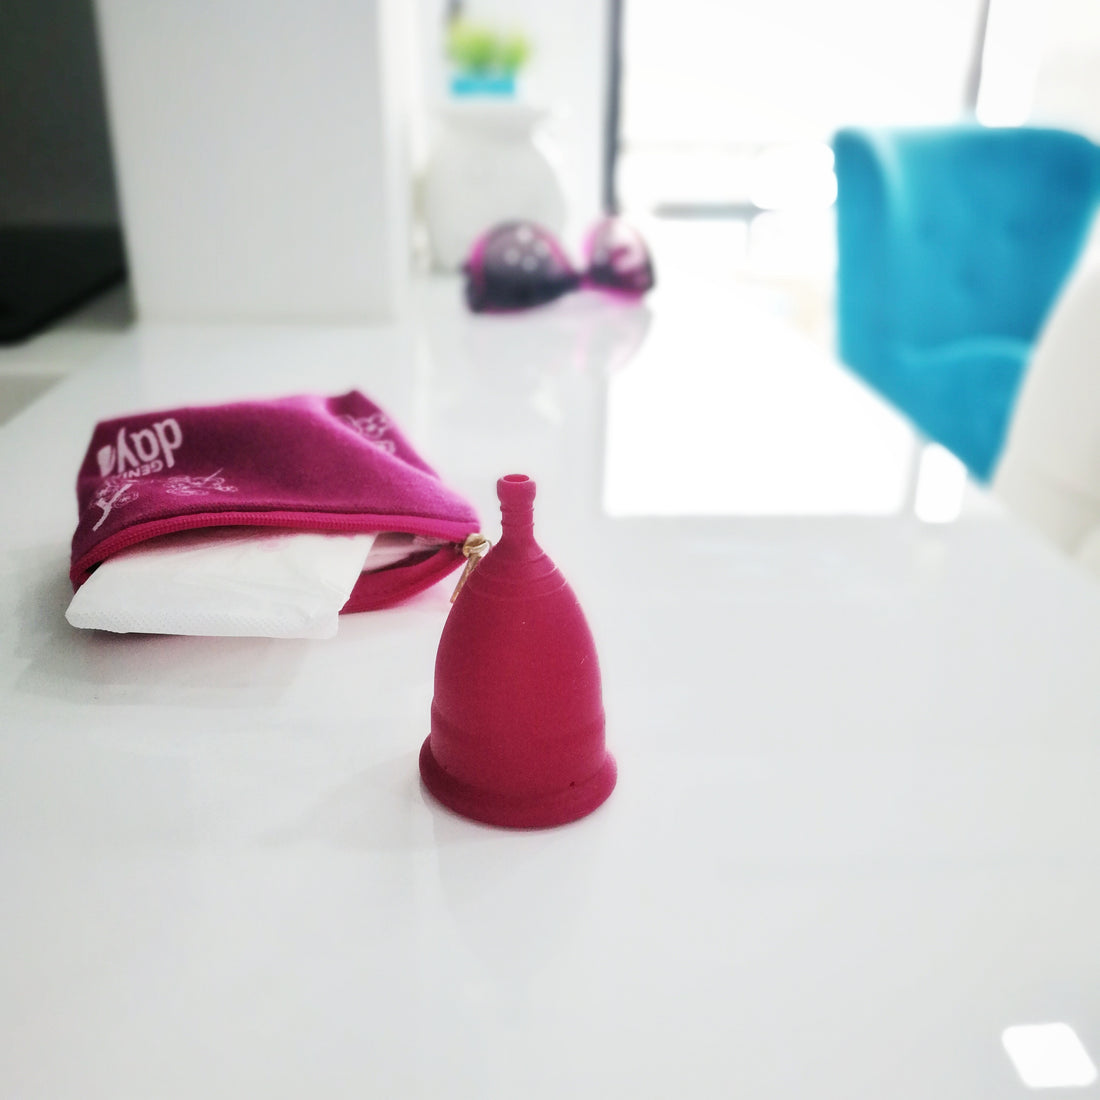 Meet Your New BFF: A Menstrual Cup